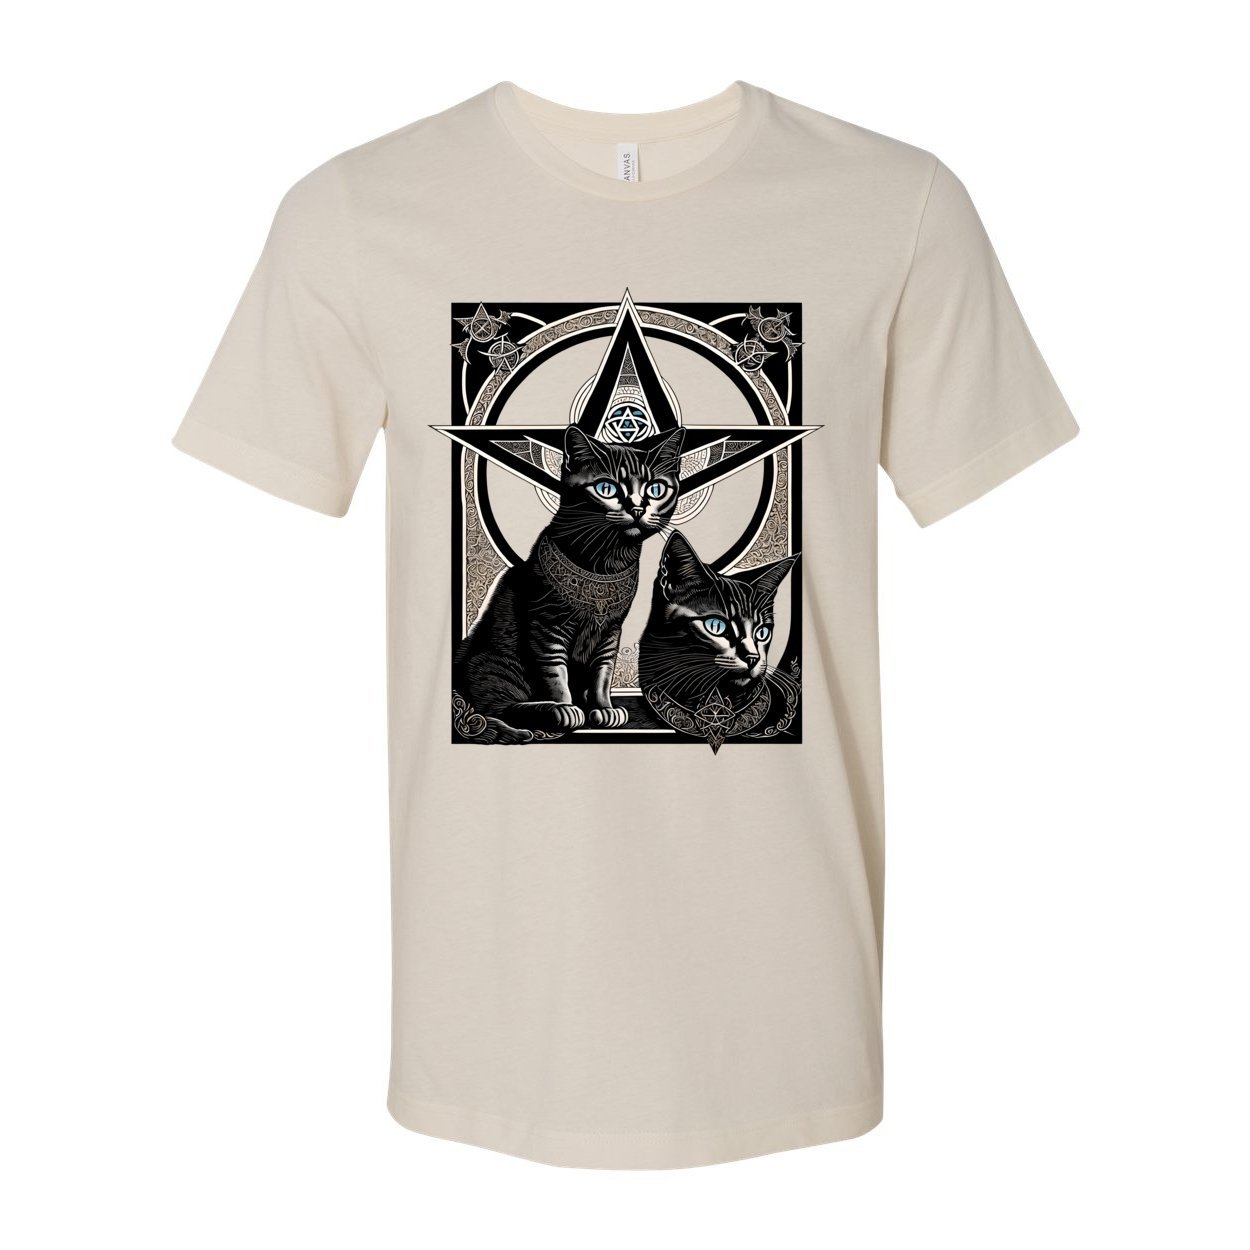 Pagan & Wiccan Kittens | Magical Druid Cats | Nature Spirituality, Earth and Sky | Pet Lover Wisdom Healing Graphic Art T-Shirt - Sacred Surreal